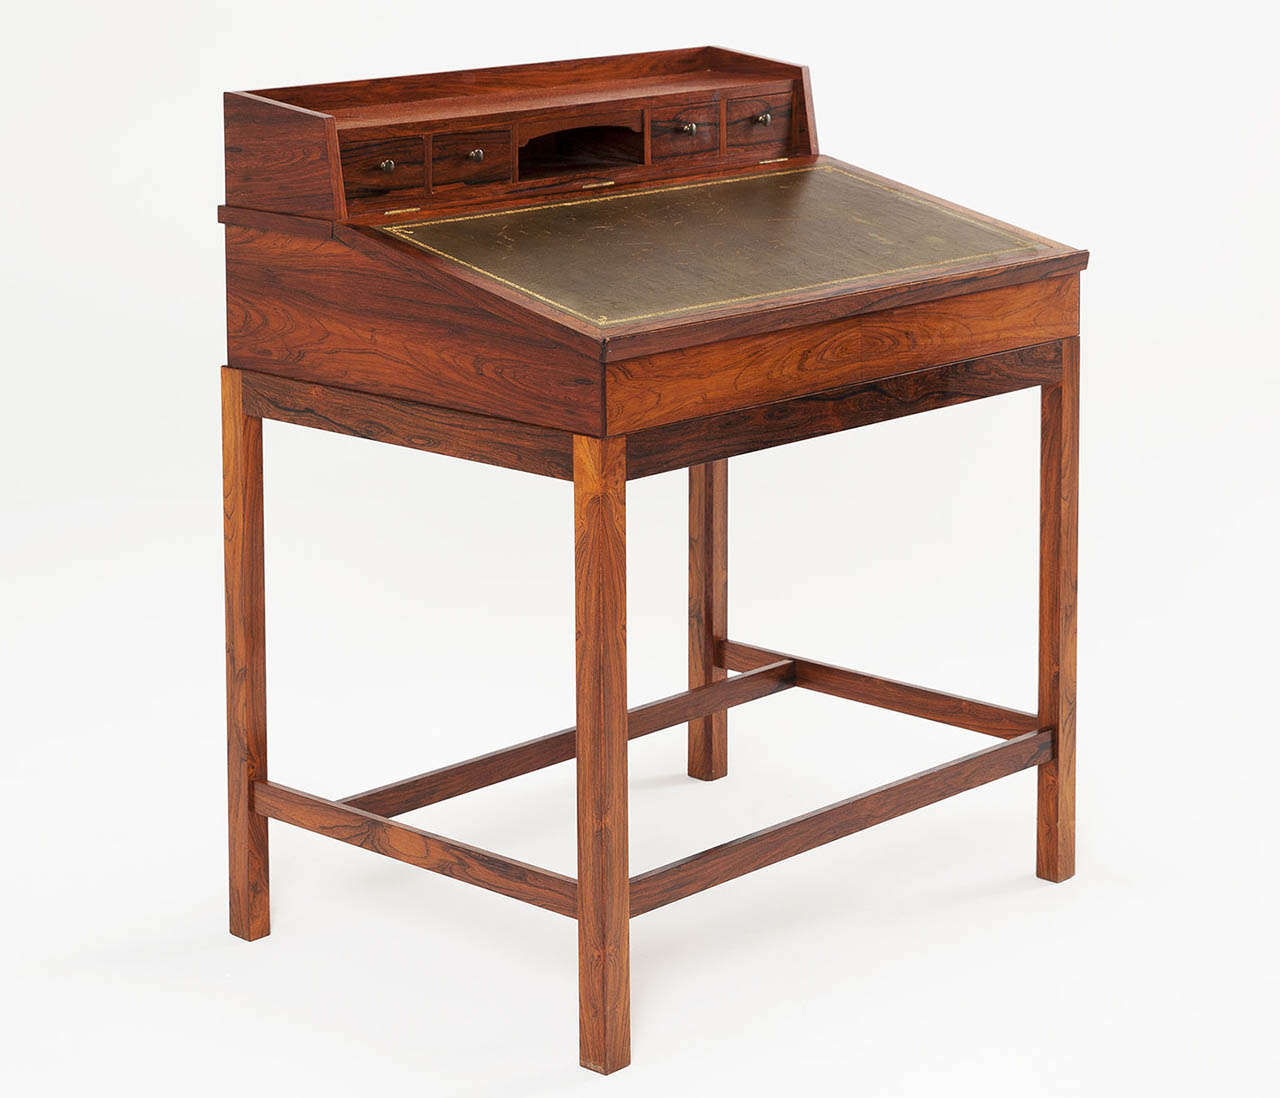 Secretaire, rosewood with olive green leather inlay, Denmark, 1940s

Can be used as a luxurious writing desk due to the tight but elegant designed shapes and combination of materials. Nice brass pulls on the small drawers.

Free shipping for all